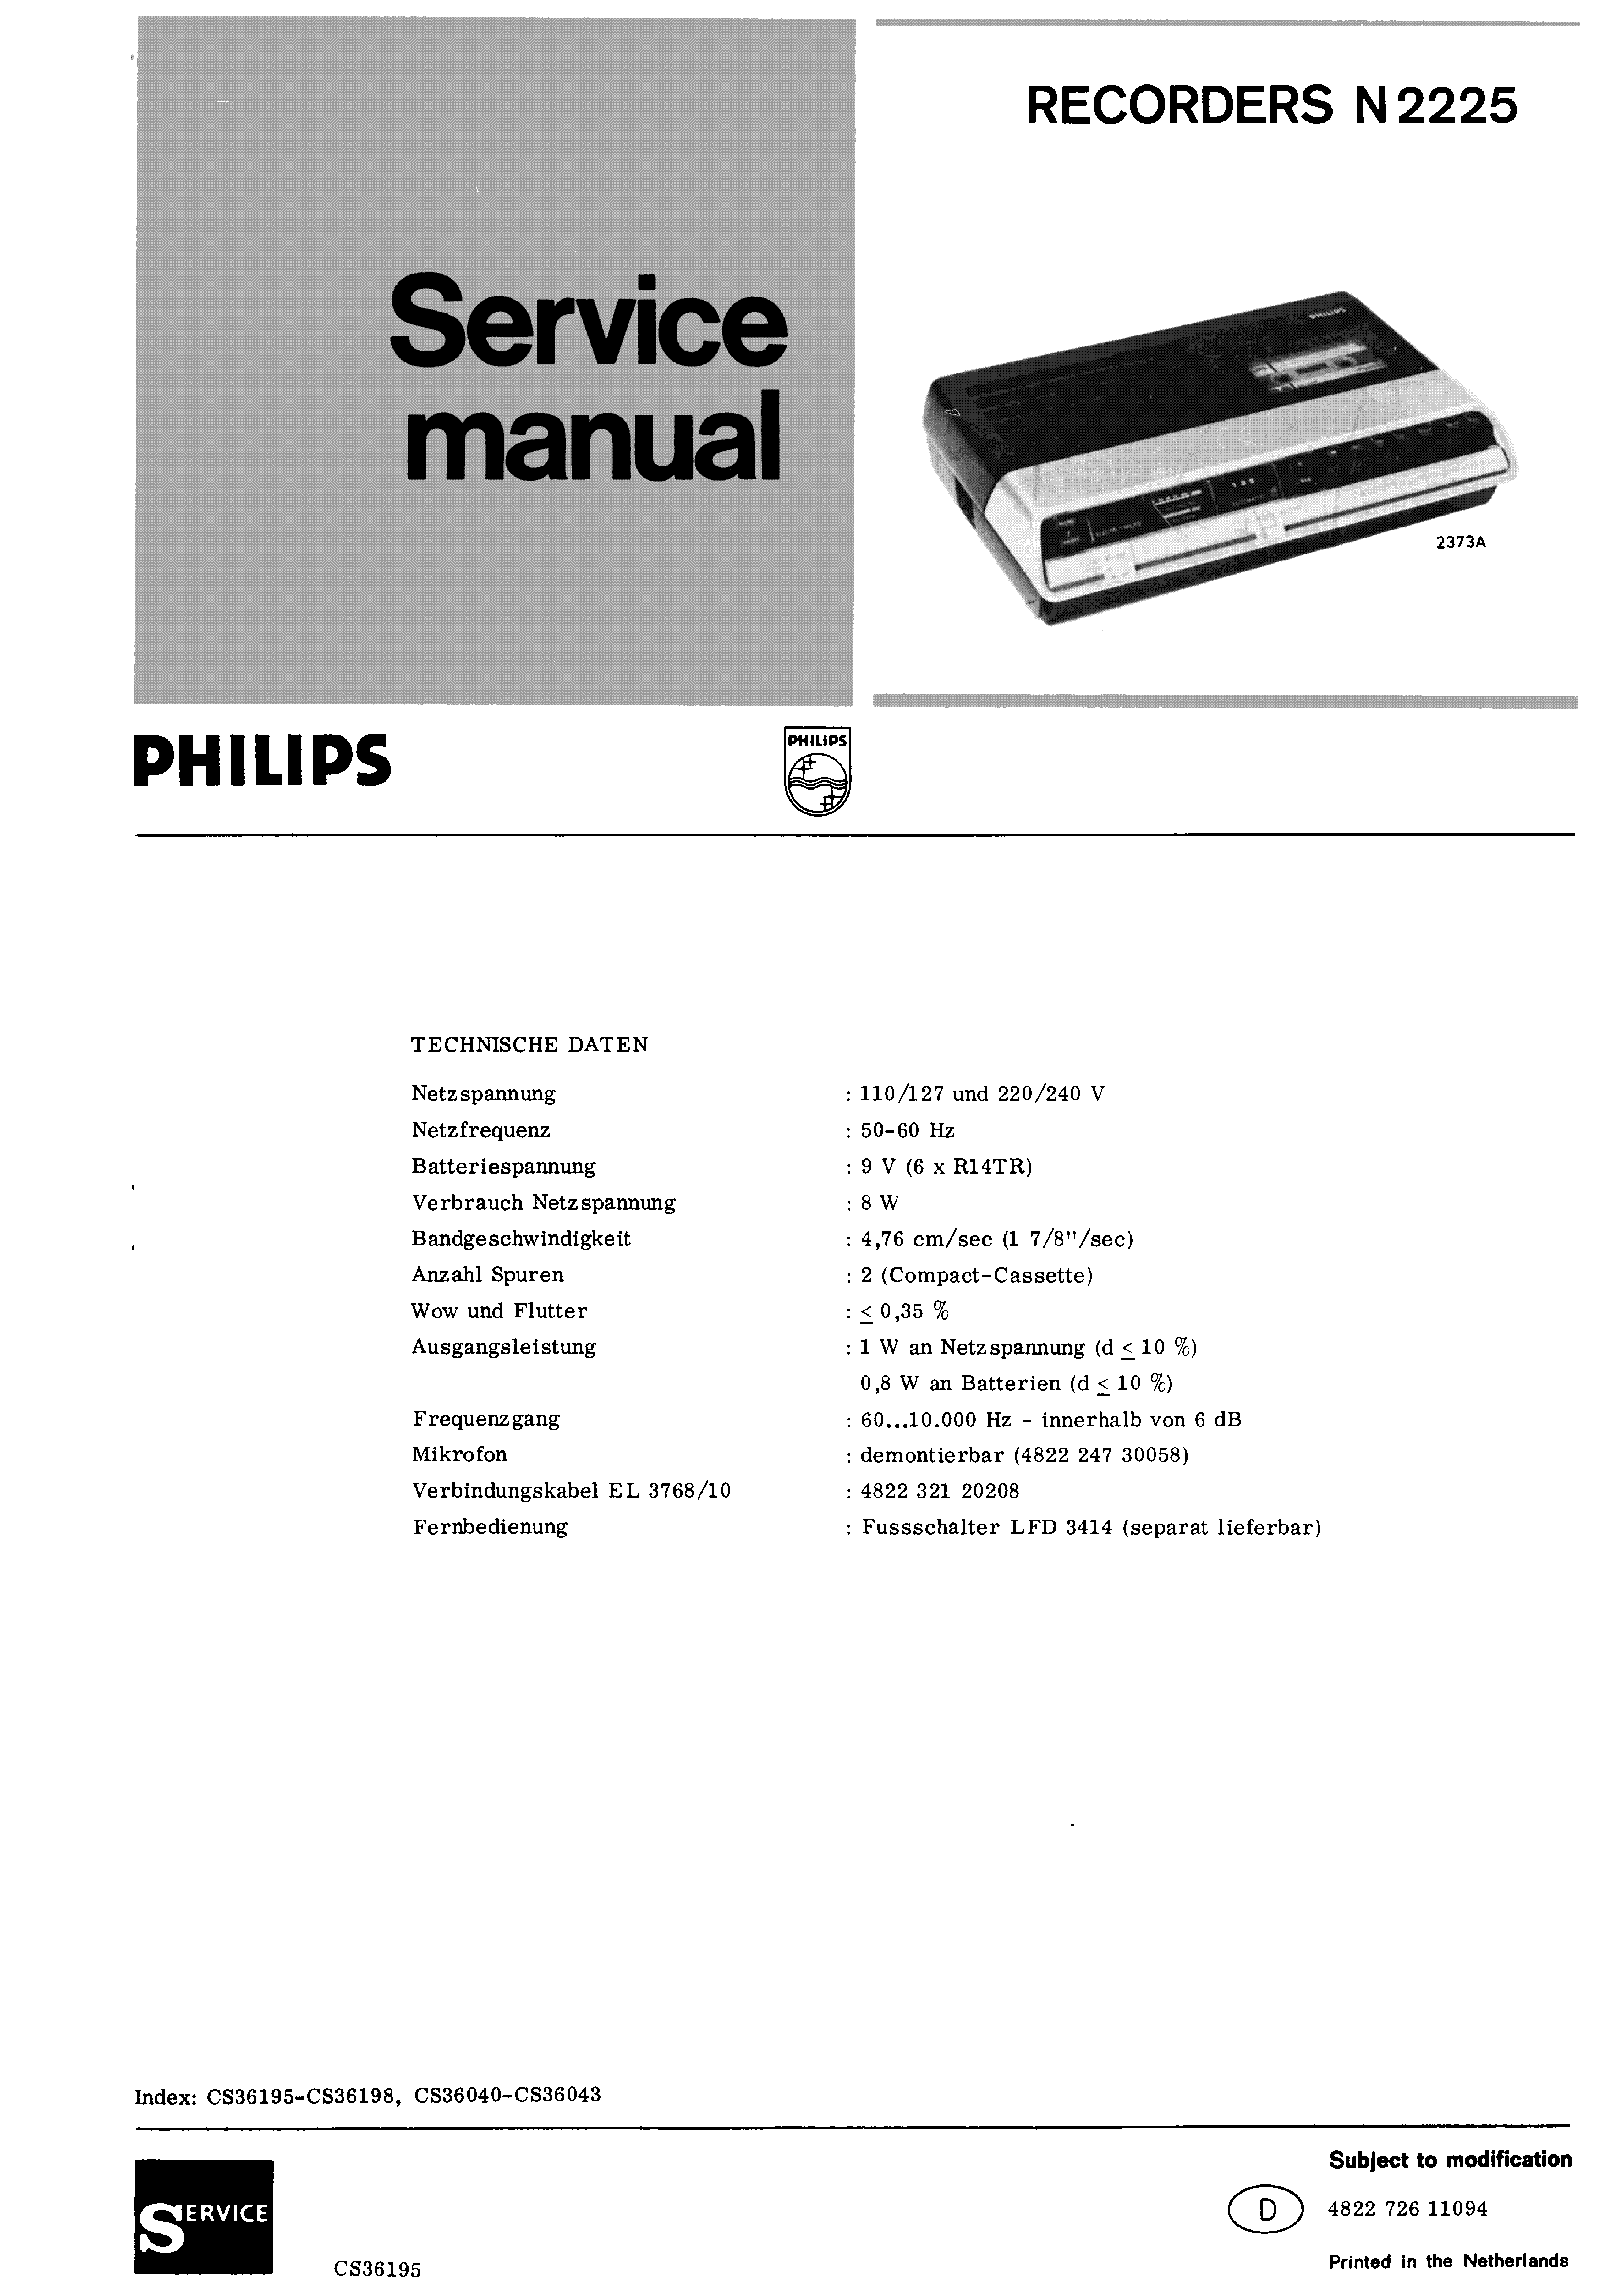 PHILIPS RECORDERS N2225 SM service manual (1st page)